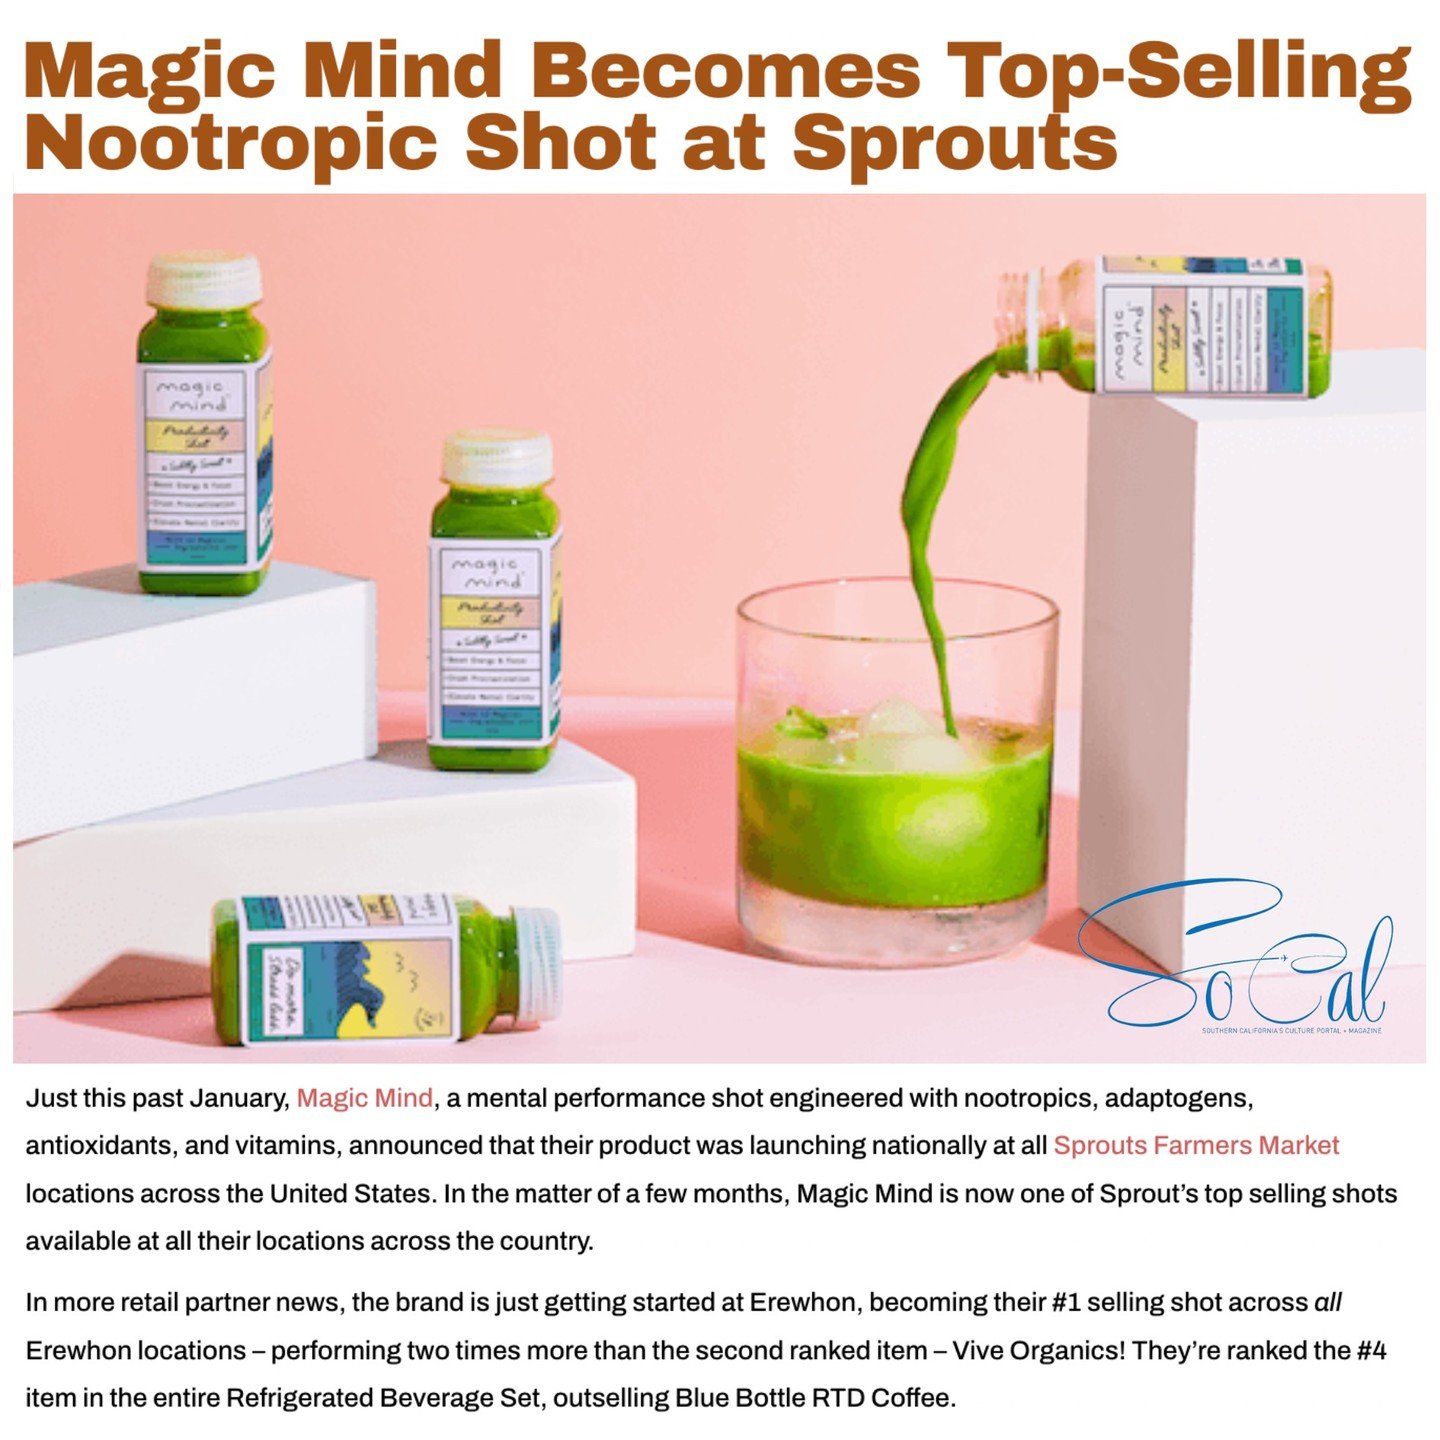 @magicmind has reached new milestones as the top-selling nootropic shot at Sprouts and the #1 shot across all Erewhon locations. 📈